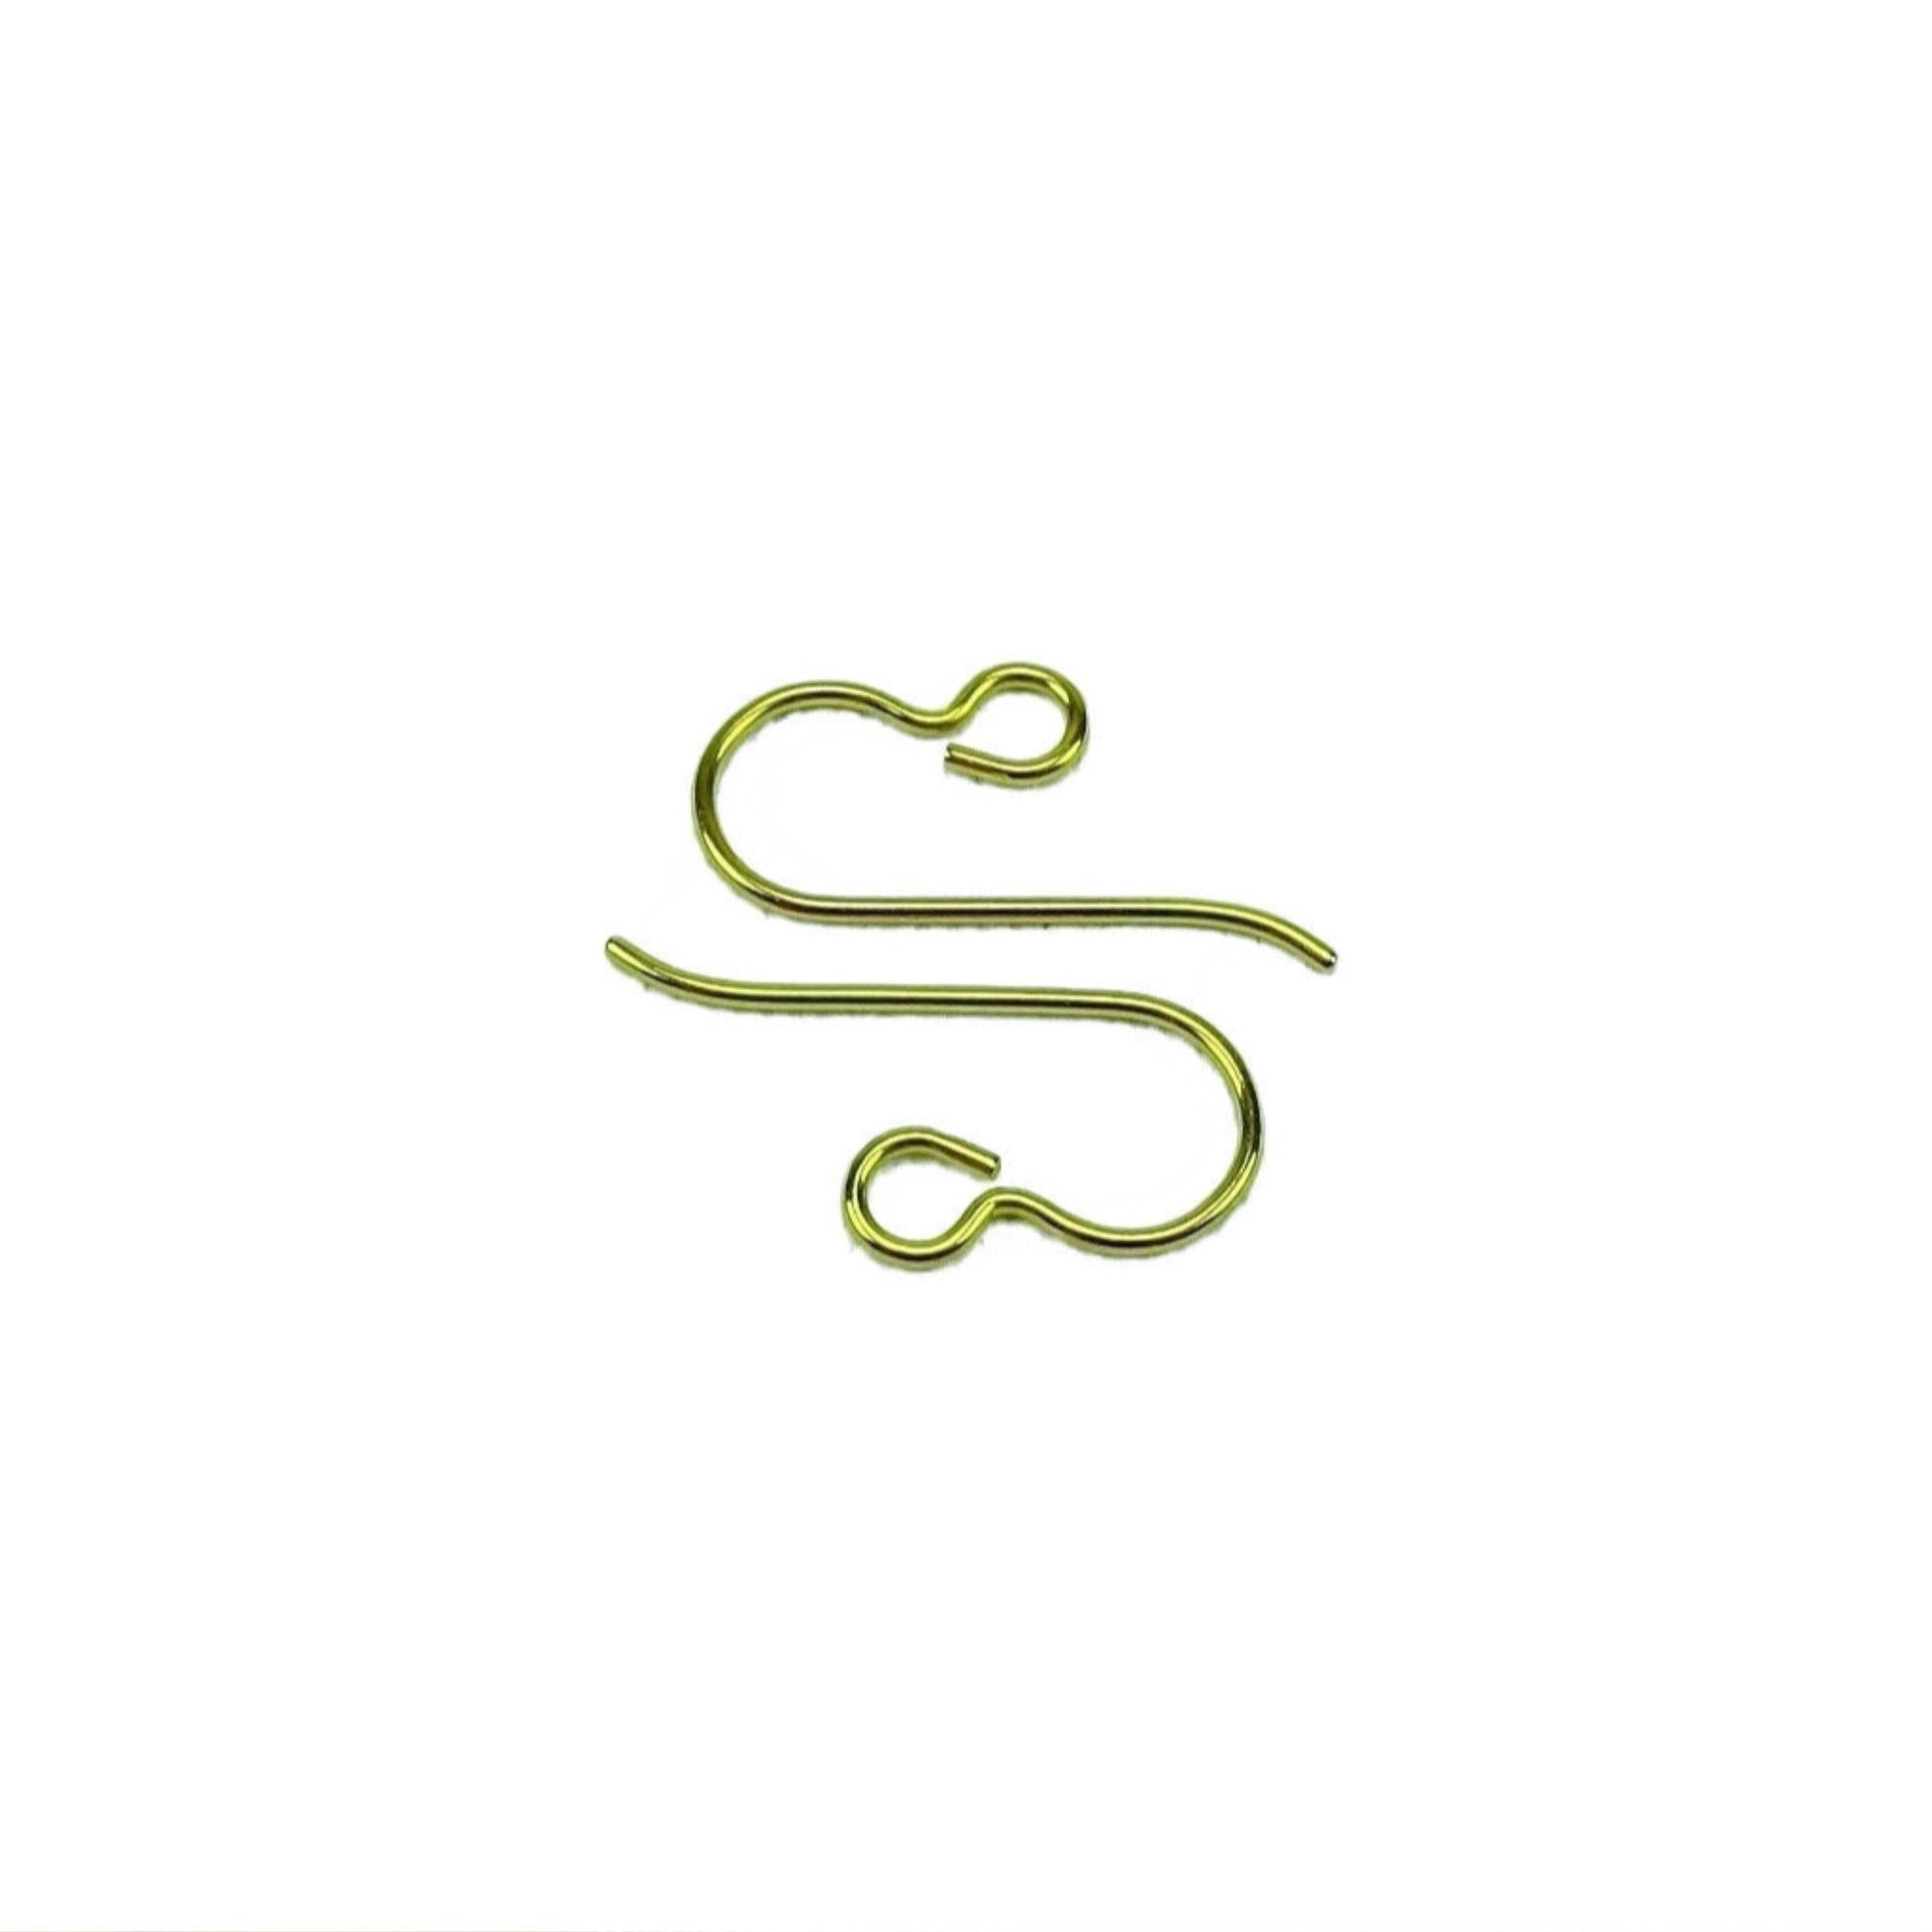 Niobium Earwire Hooks Yellow-gold, French Hooks Pure Niobium Wire,  Nickel Free Ear Wires, Hypoallergenic DIY Replacement Earring Hooks